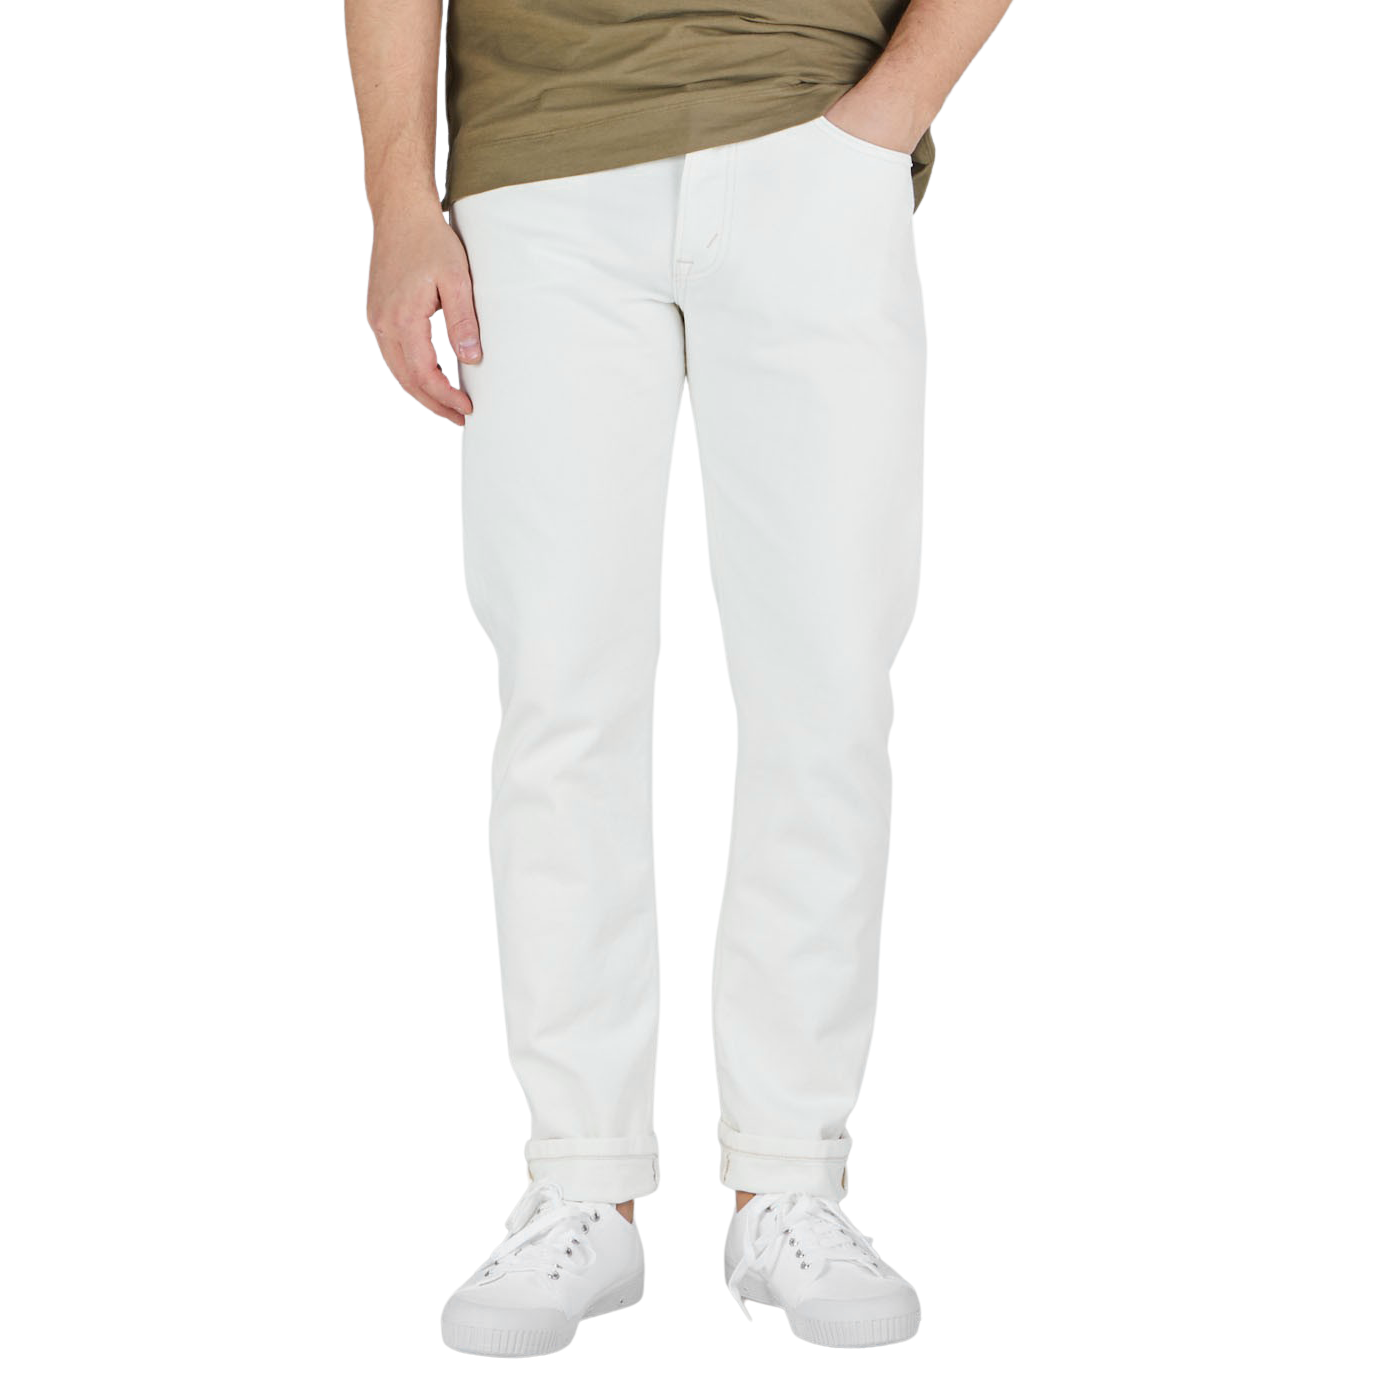 Jenerica Natural White Cotton TM005 Jeans Front1